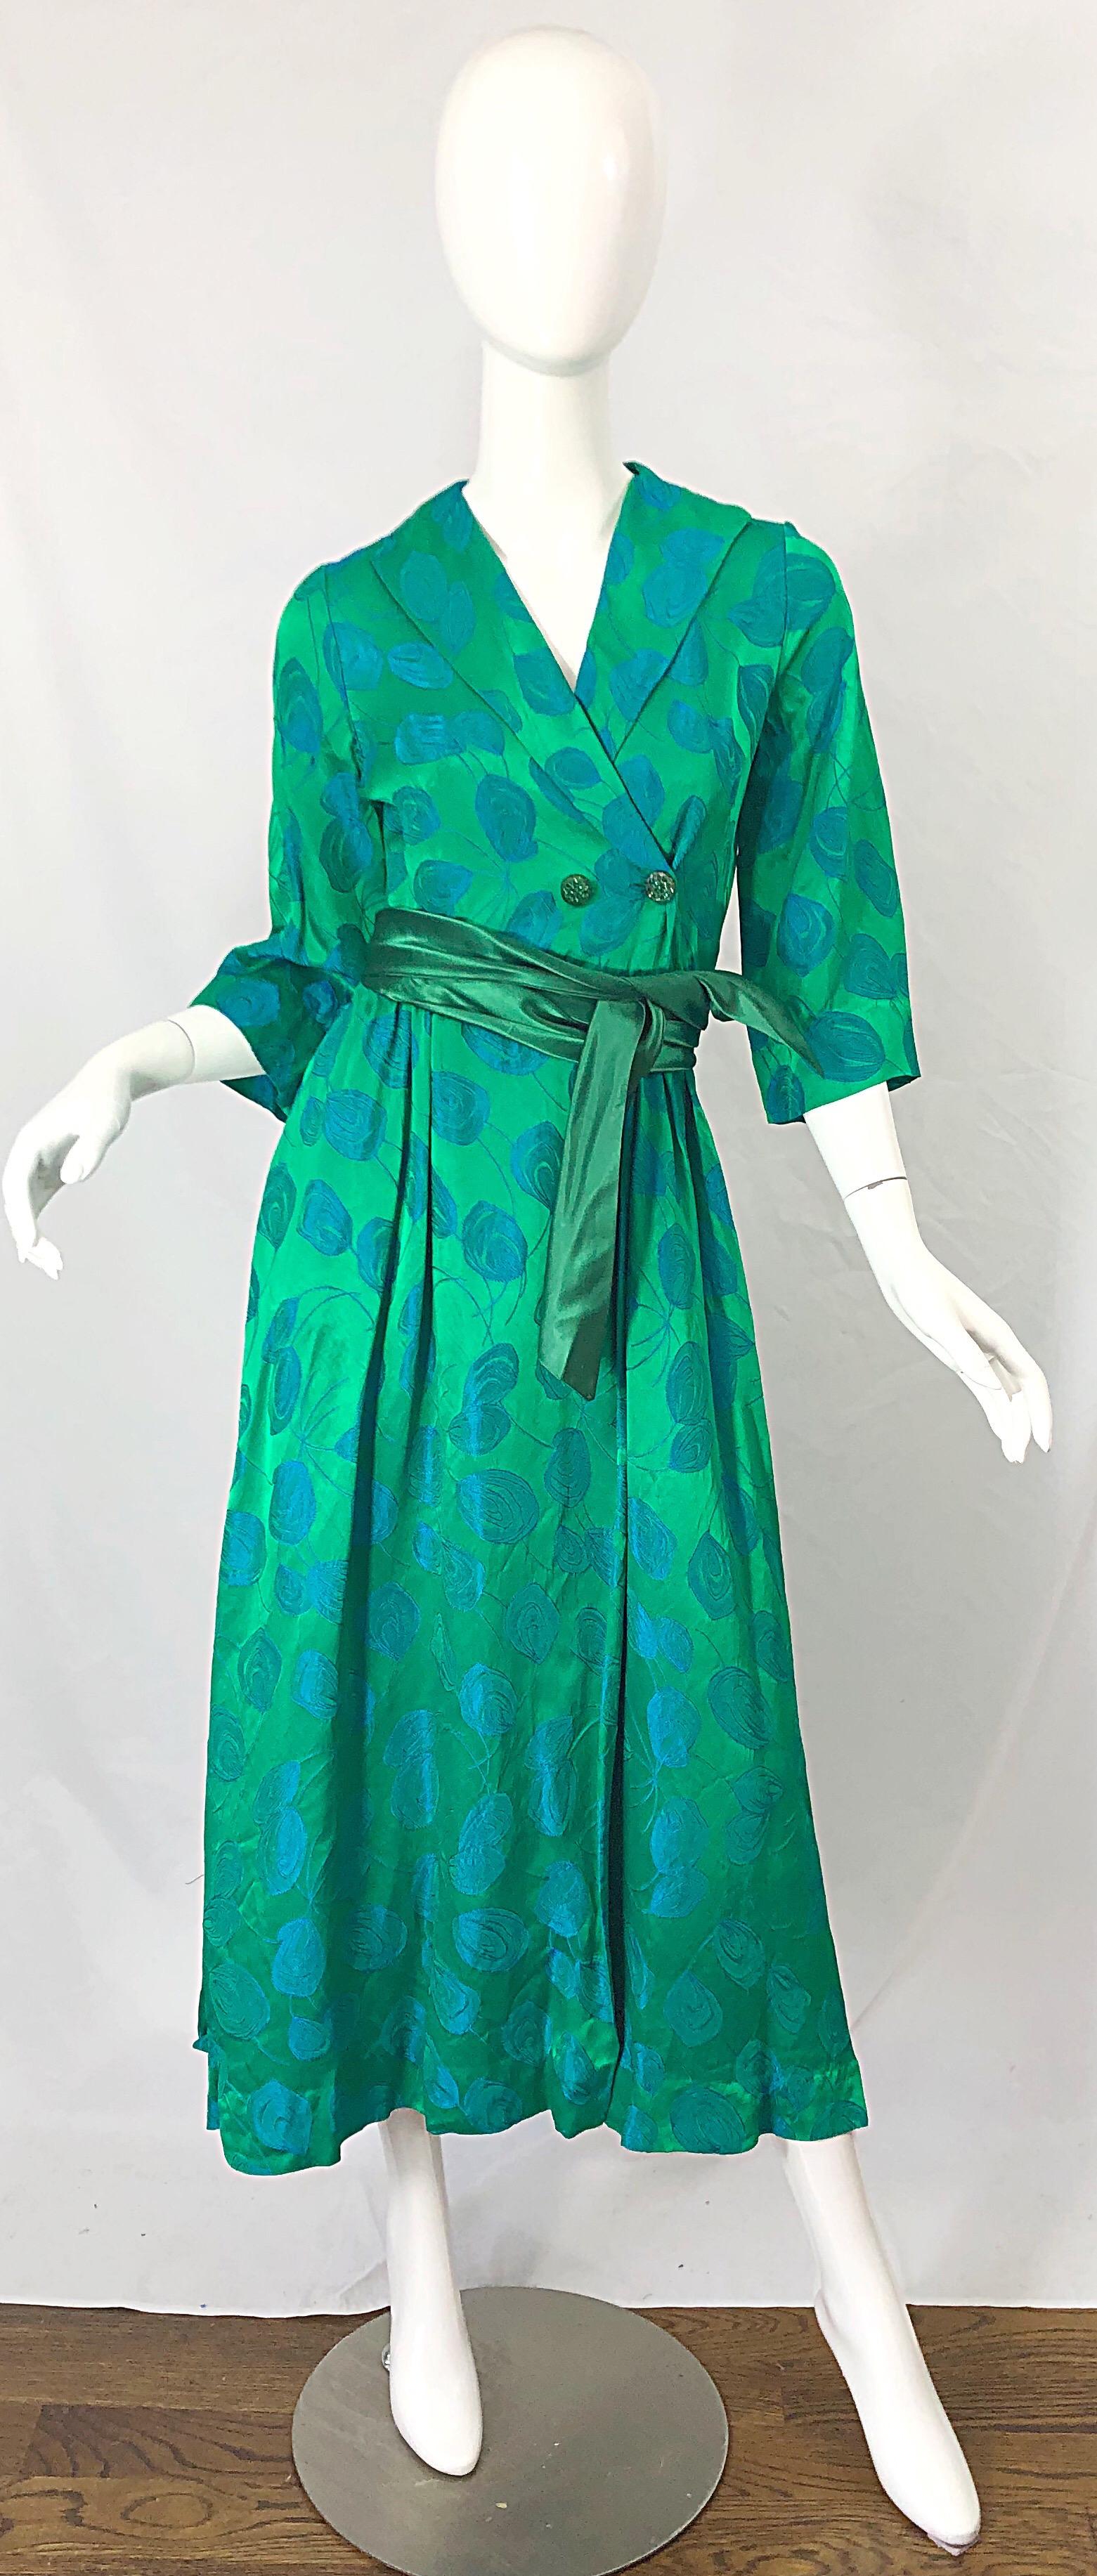 Beautiful vintage 1950s kelly green and blue flower print wrap dress ! Wrap style with interior ties and green rhinestone encrusted buttons. Shawl style collar. Long detachable silk belt. Blue abstract flowers printed throughout. Perfect for any day